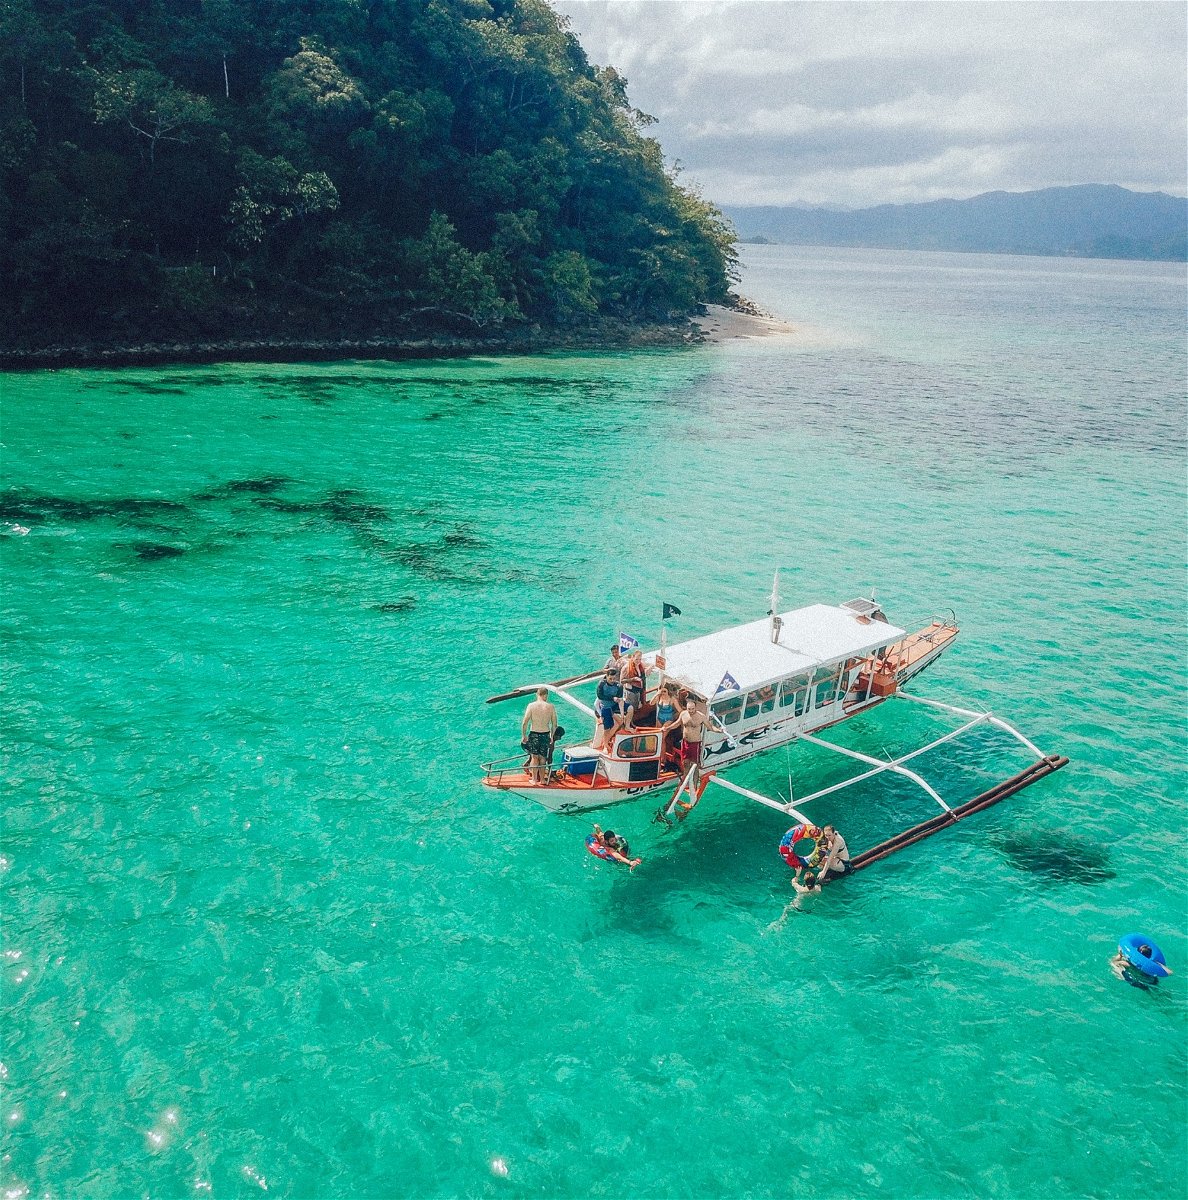 Cruise the Philippines amazing islands with your group